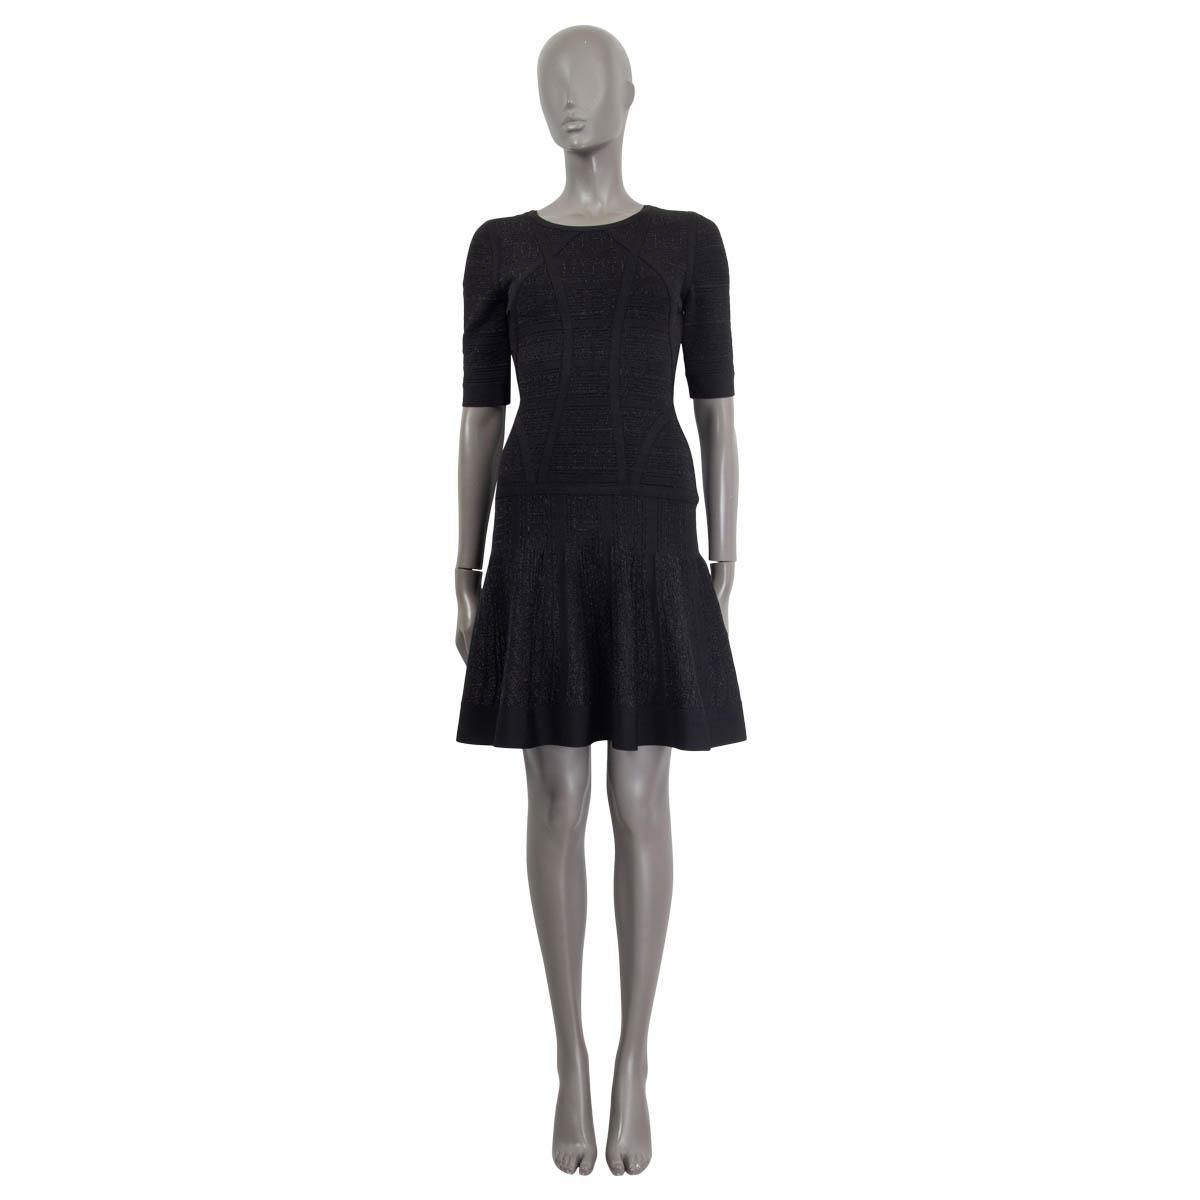 100% authentic Herve Leger Clara drop-waist dress in black rayon (75%), nylon (24%) and spandex (1%). Has a round neckline, shimmering black lurex threads and short sleeves. Opens with a concealed zipper and a hook at back. Unlined. Has been worn